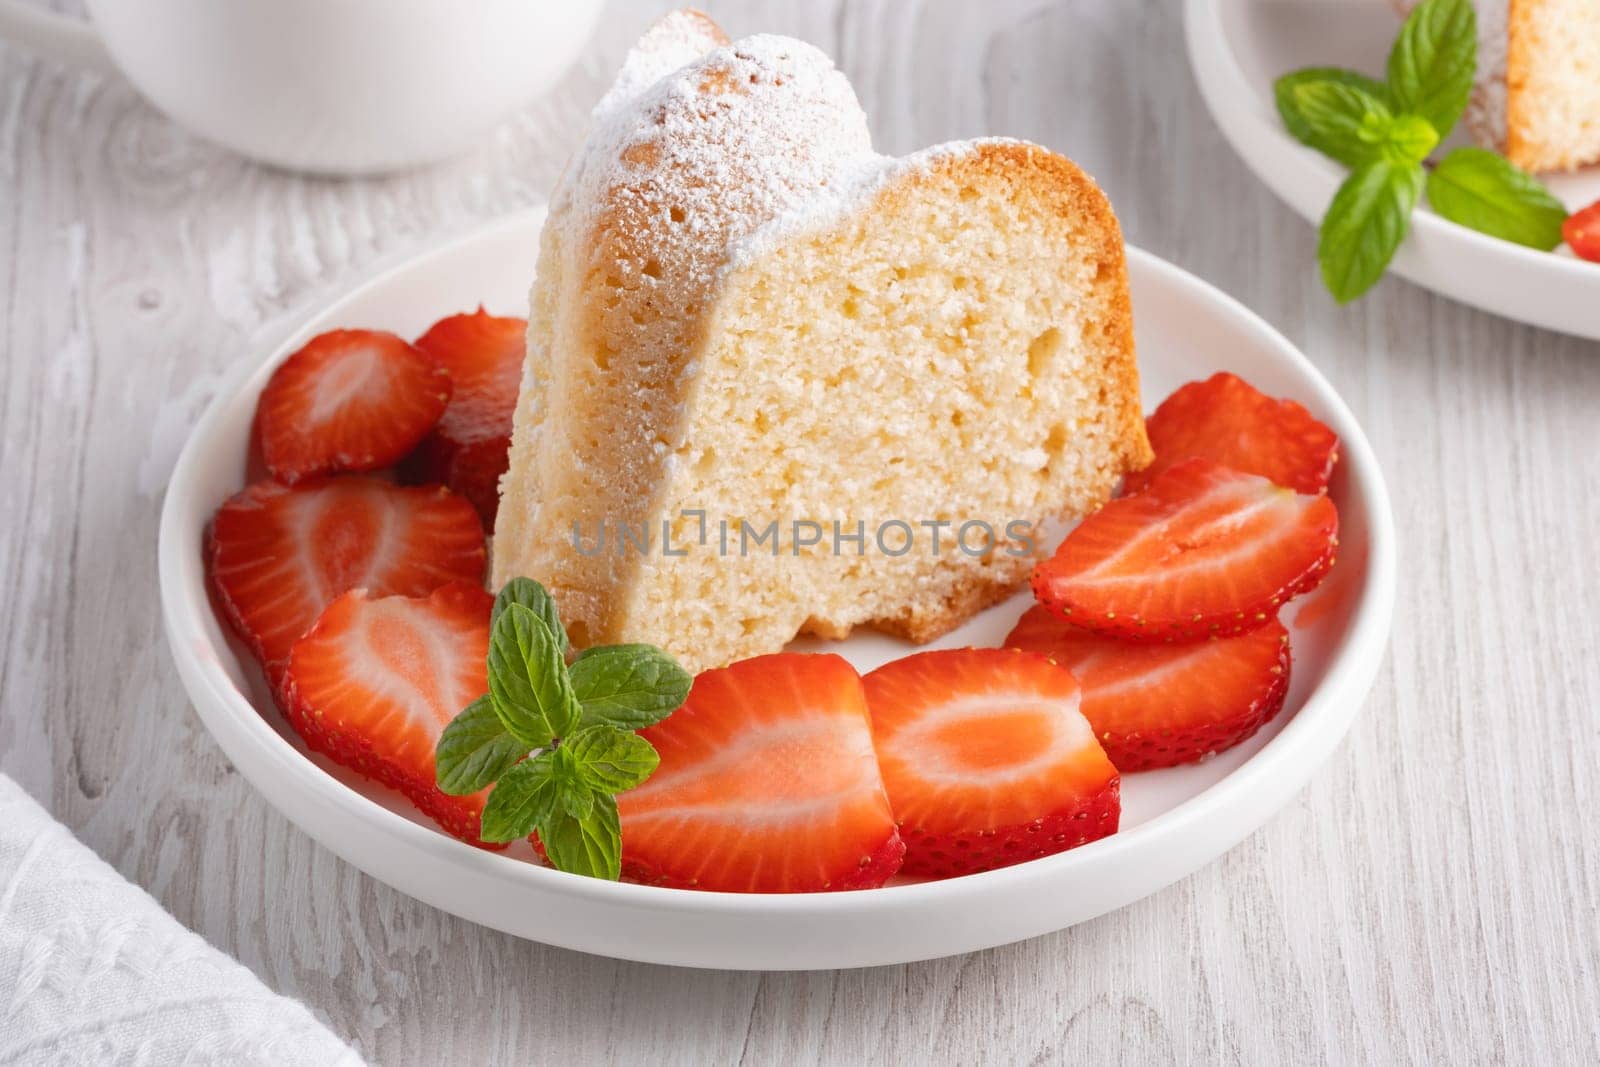 Piece of cupcake with strawberries on a plate.